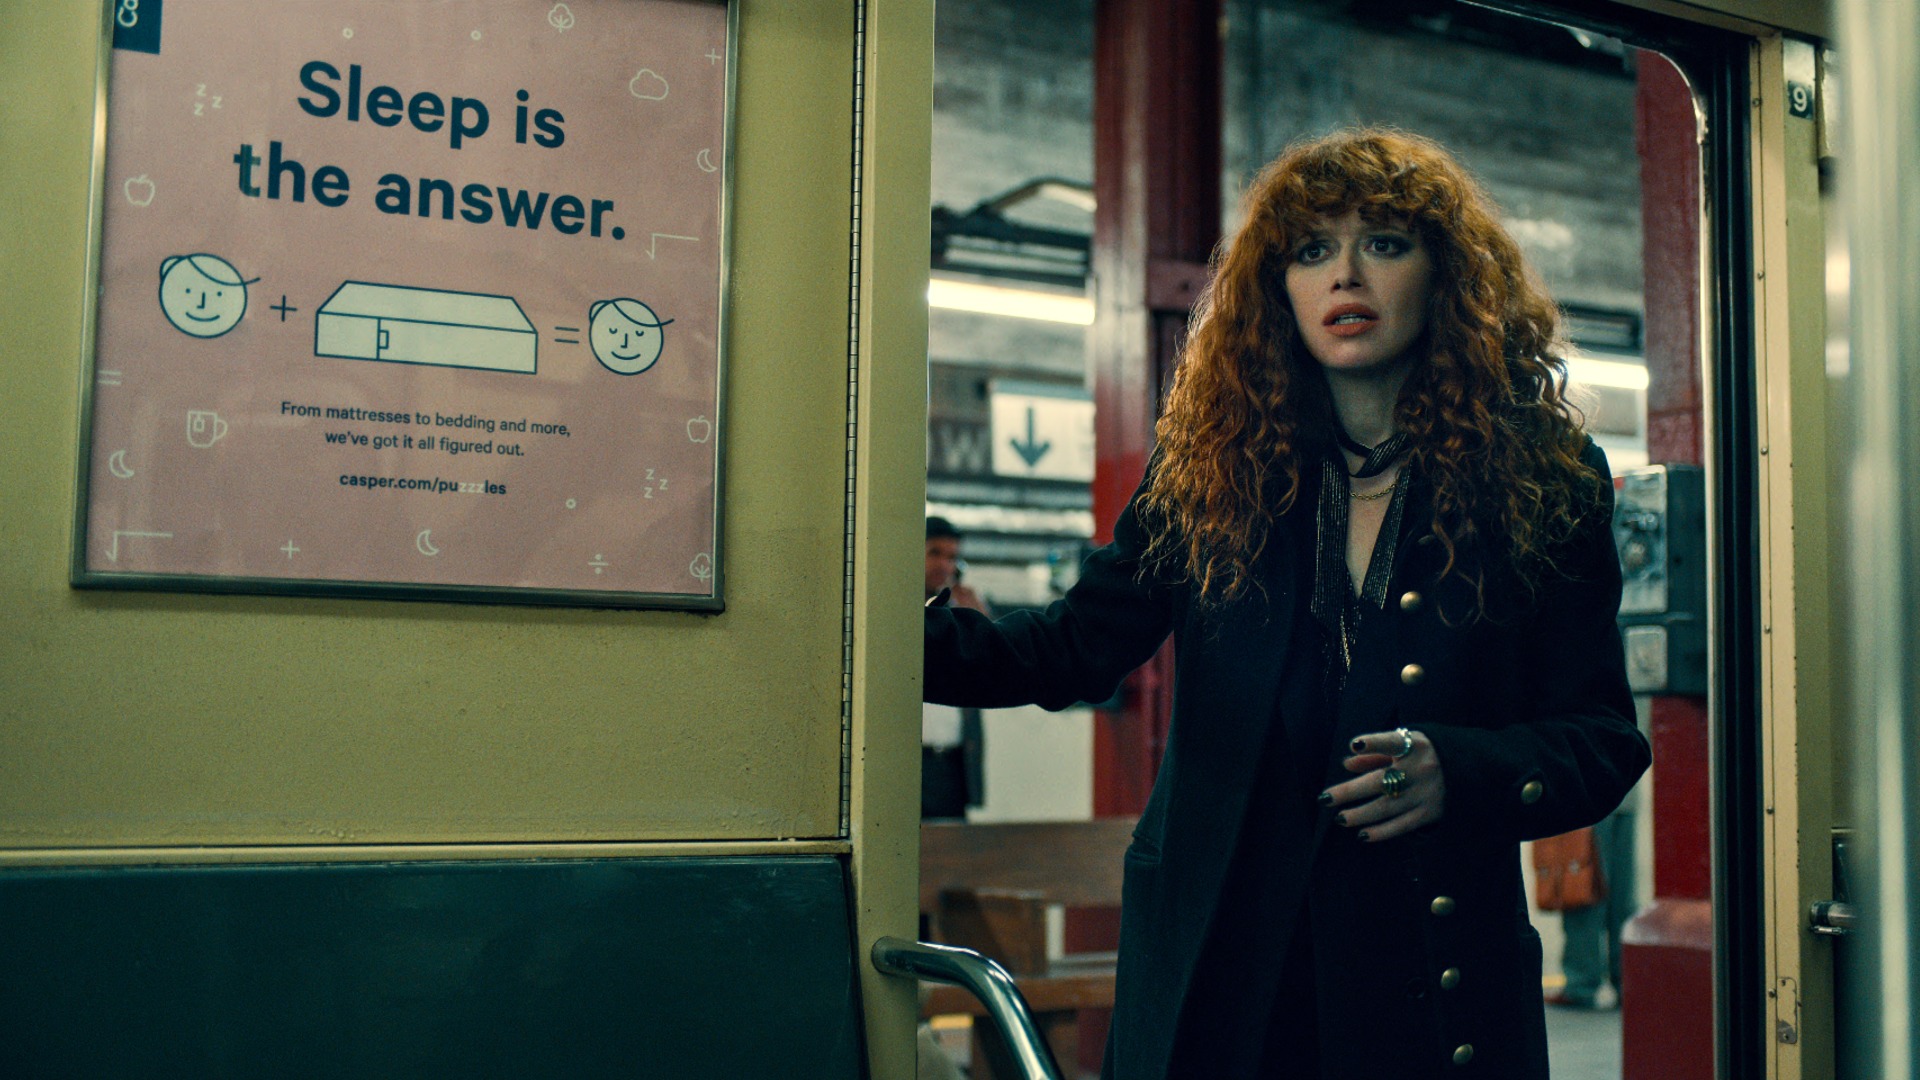 Russian Doll season 2: Netflix release date, trailer, cast, and more